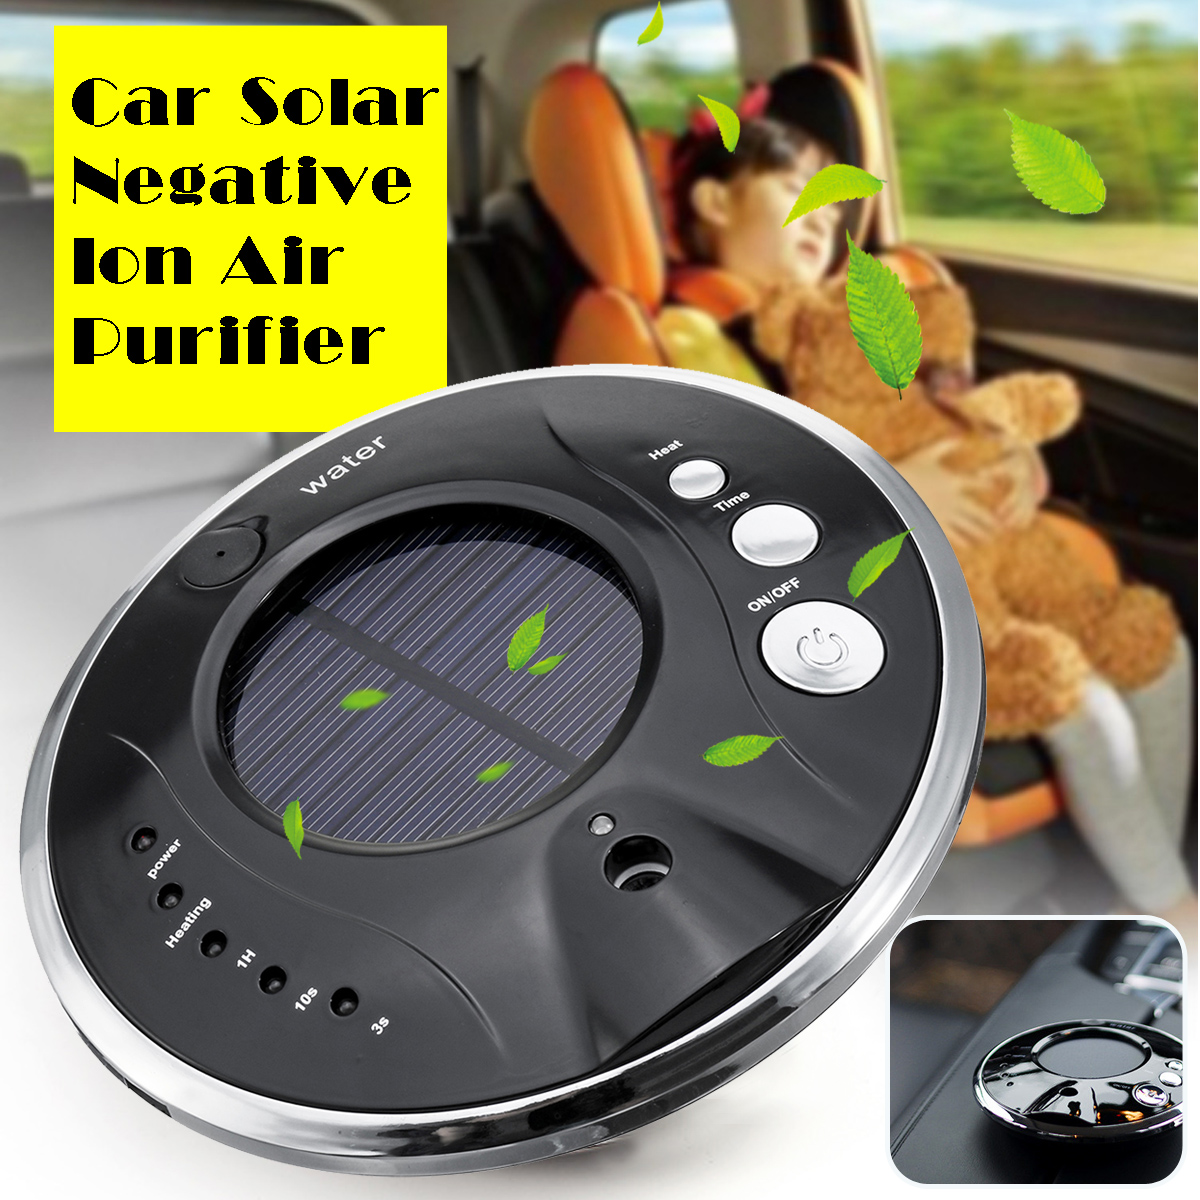 Car-Solar-Powered-Negative-Ion-Air-Purifier-5V-Cleaner-Purifier-humidification-1670794-2